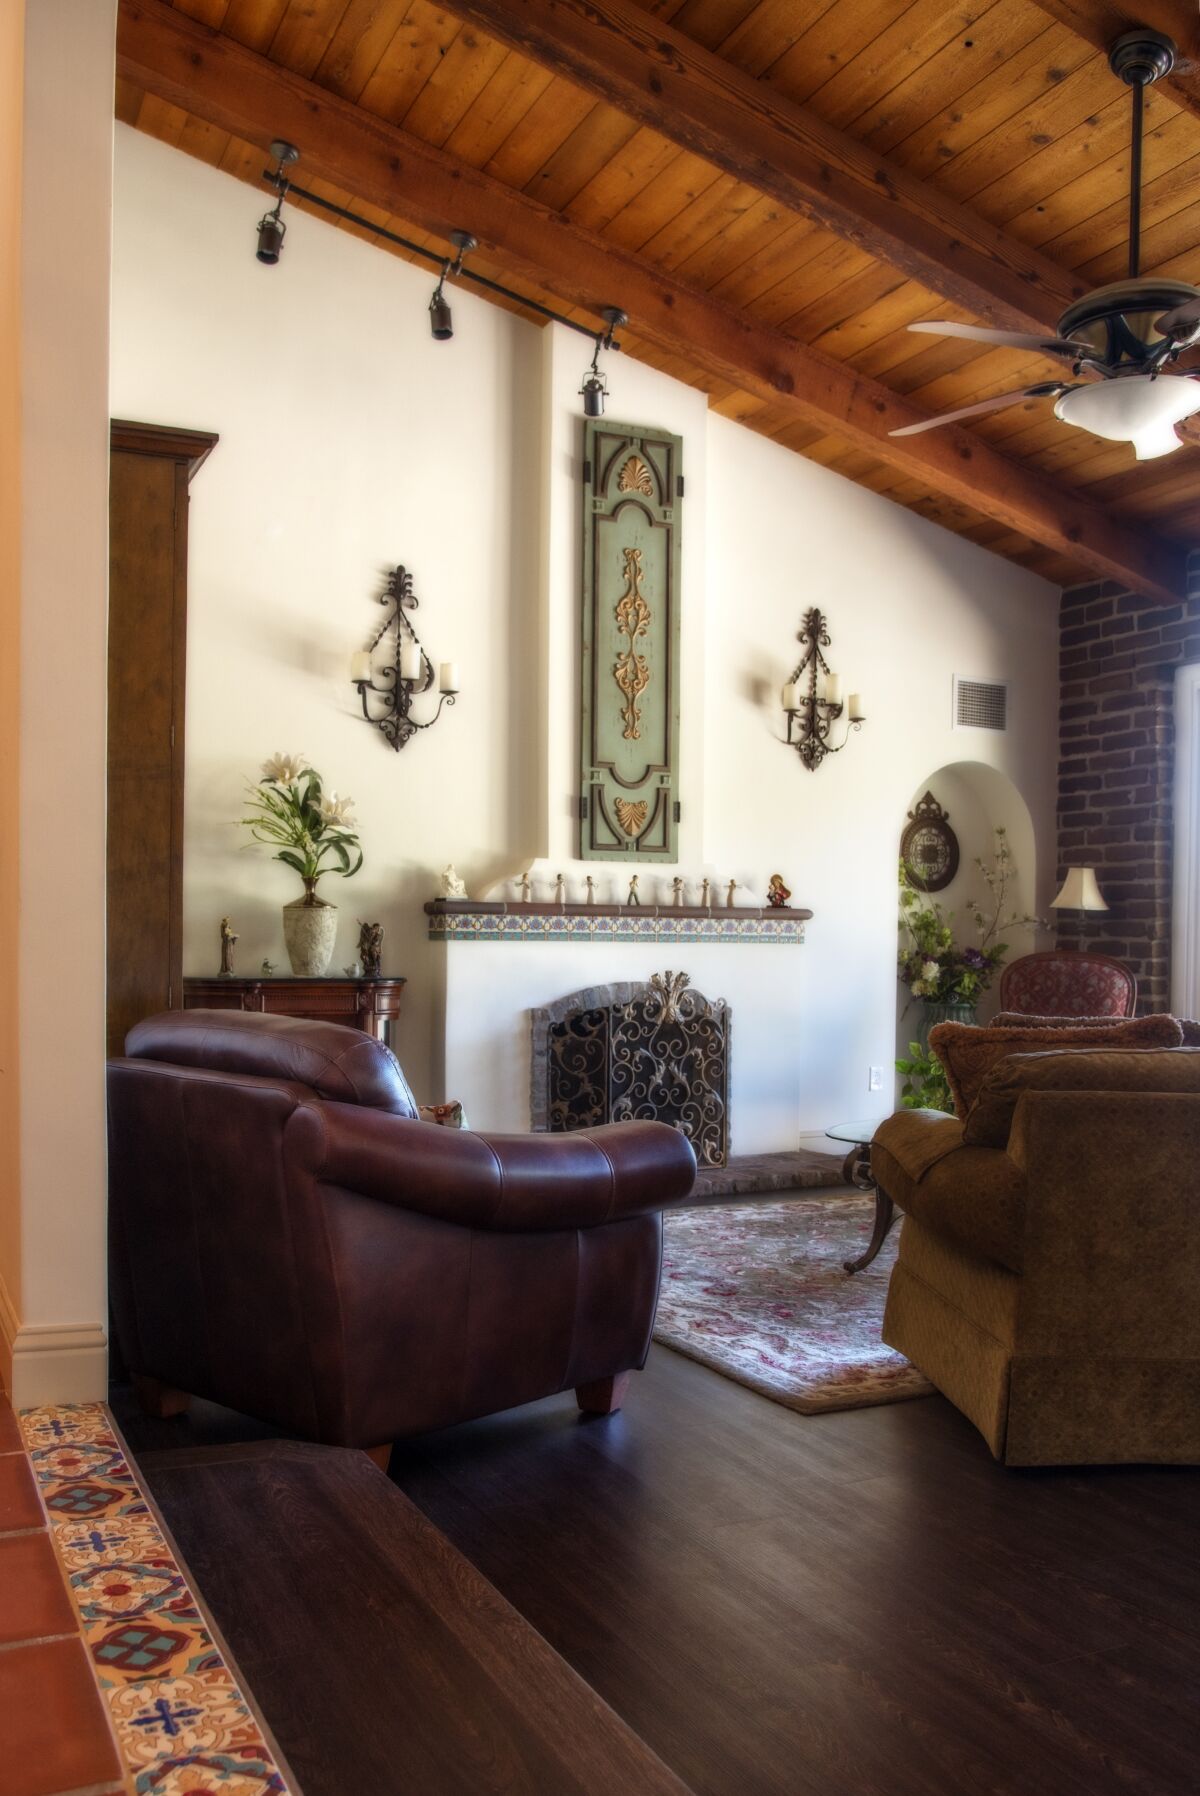 The Zingheim adobe is a more modern adobe home, recently renovated and with an open entry and floor plan.